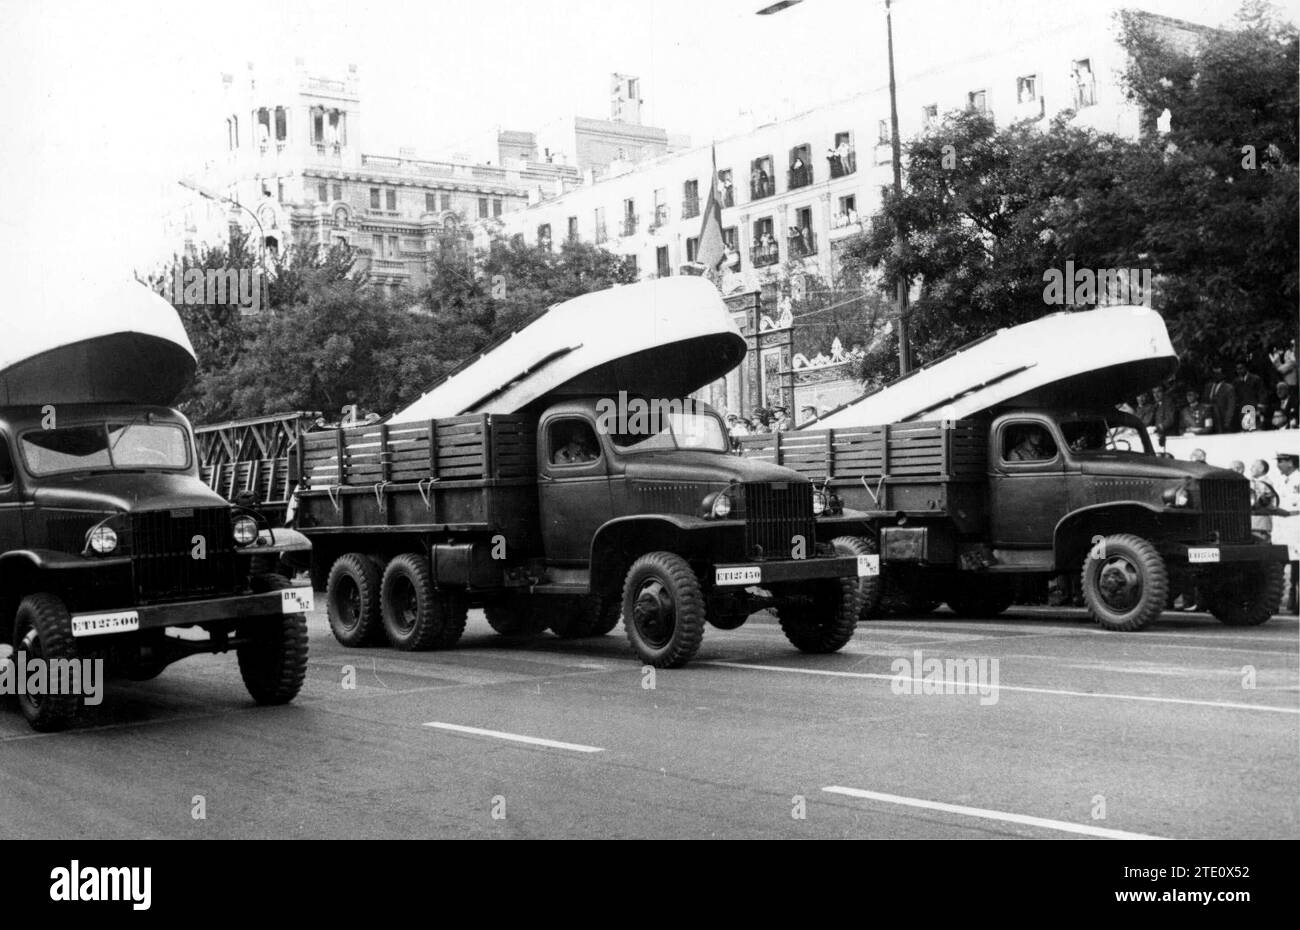 07/16/1961. Barges in the Victory Parade. Credit: Album / Archivo ABC / Manuel Sanz Bermejo Stock Photo